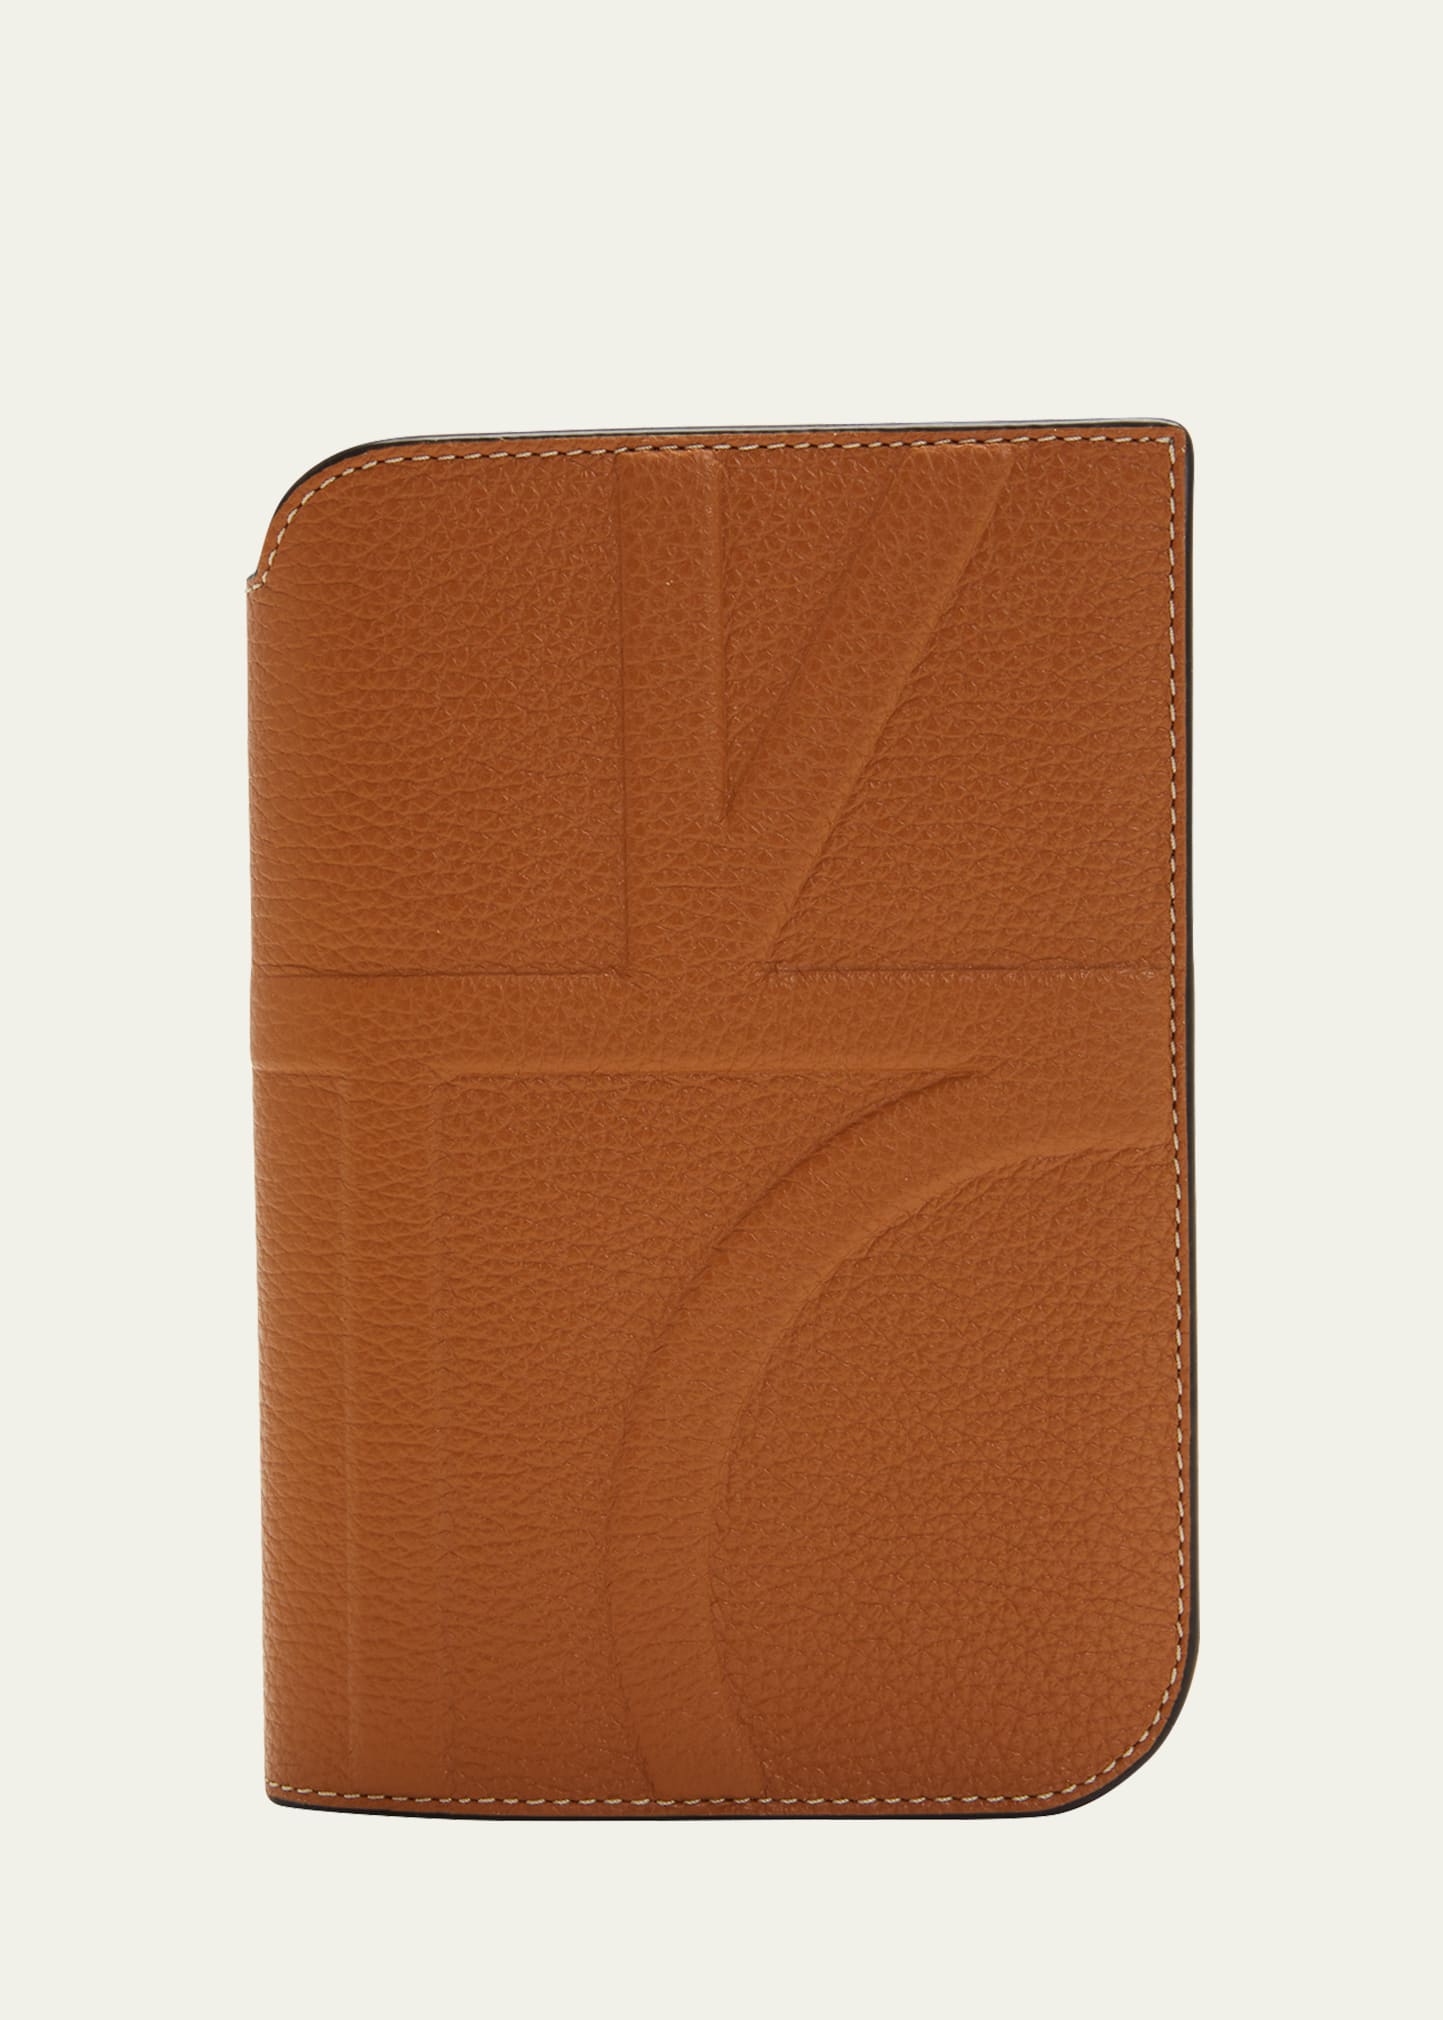 Luxury Leather Embossed Large Initial Passport Holder Travel 